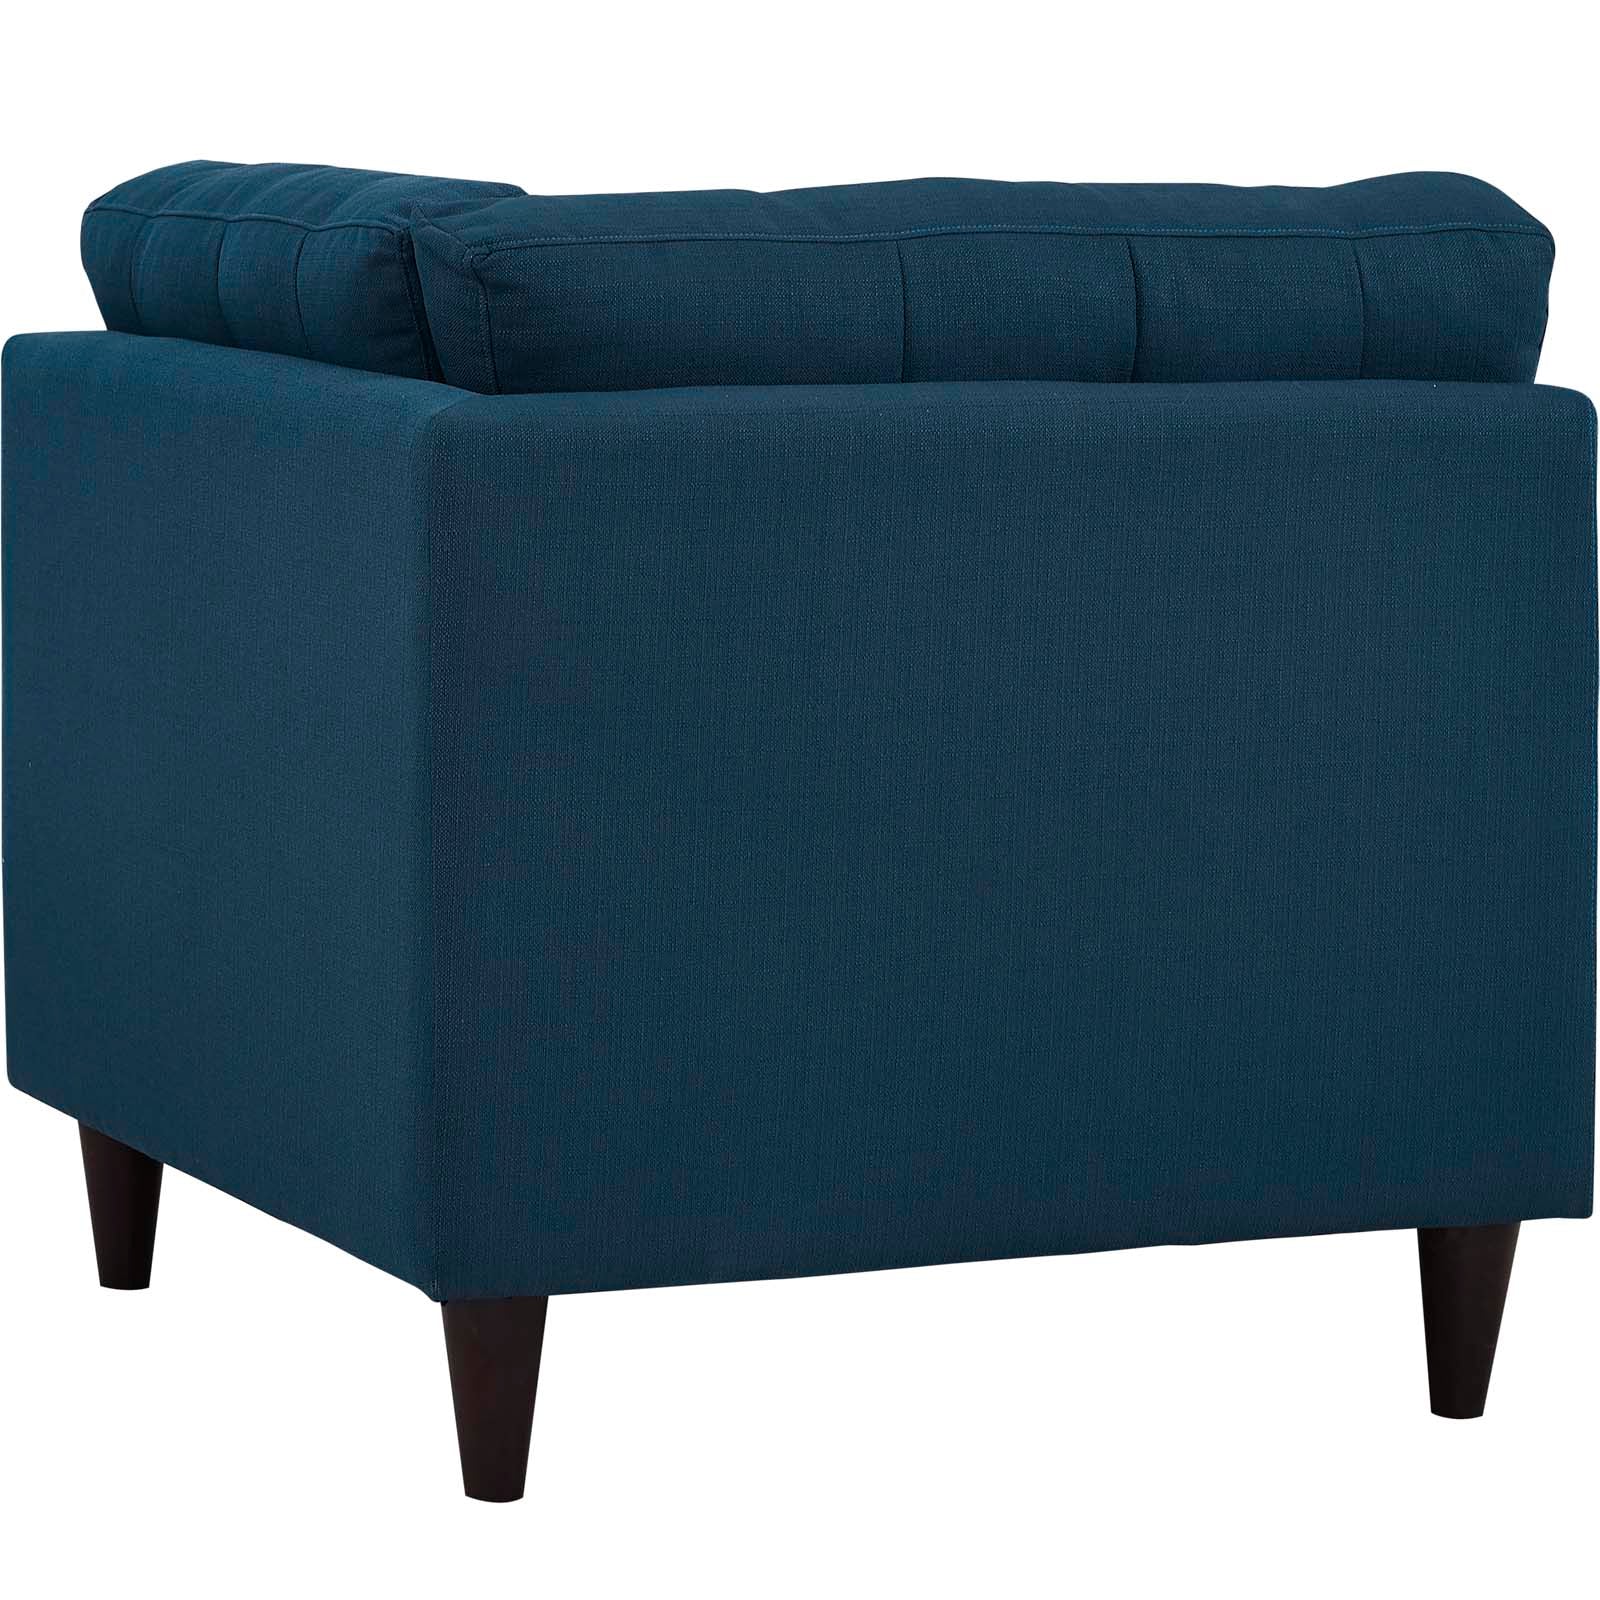 Modway Accent Chairs - Empress Upholstered Fabric Corner Sofa Azure